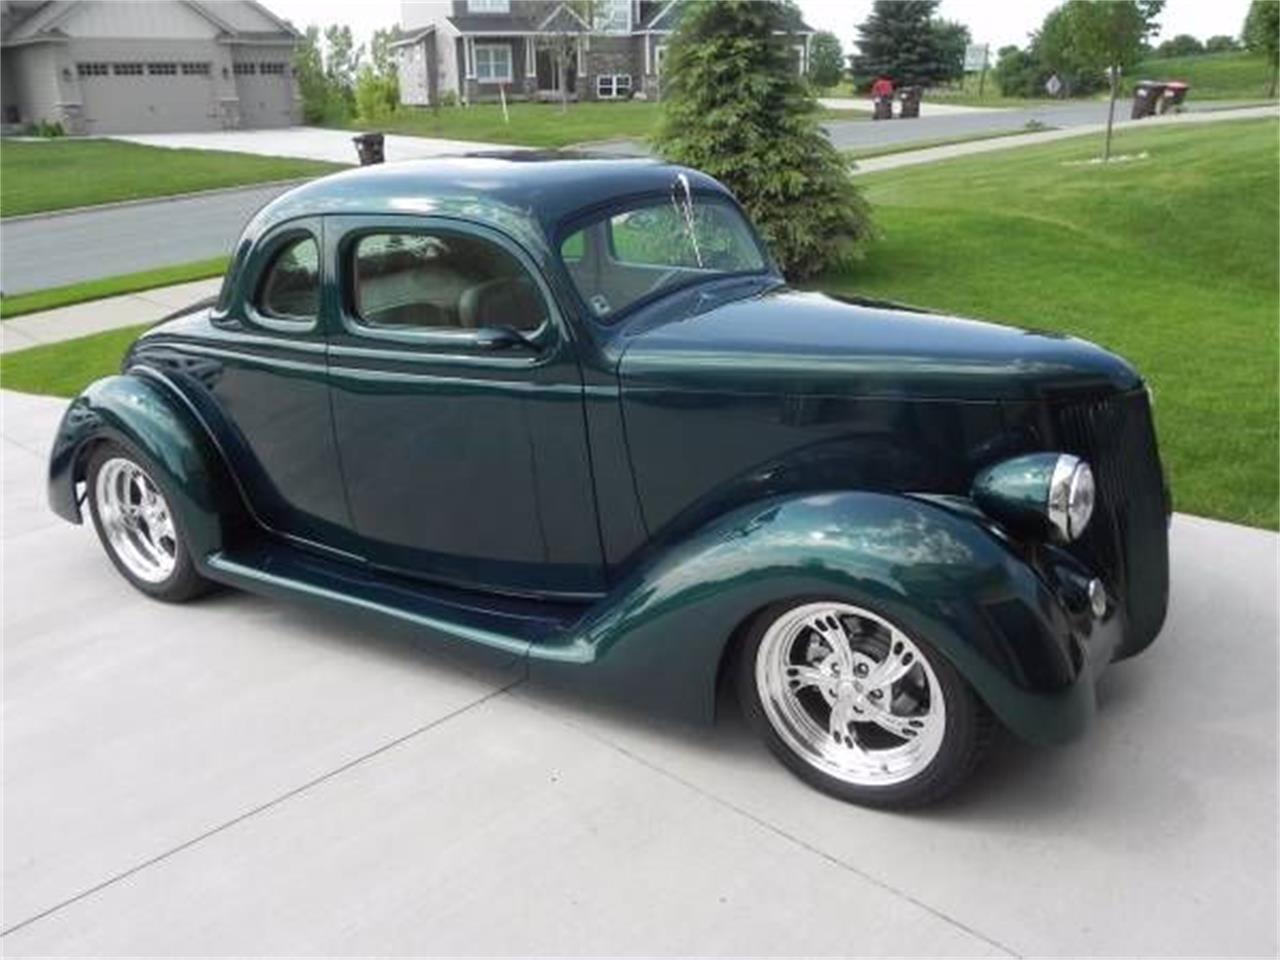 1936 Ford Coupe for sale in Cadillac, MI